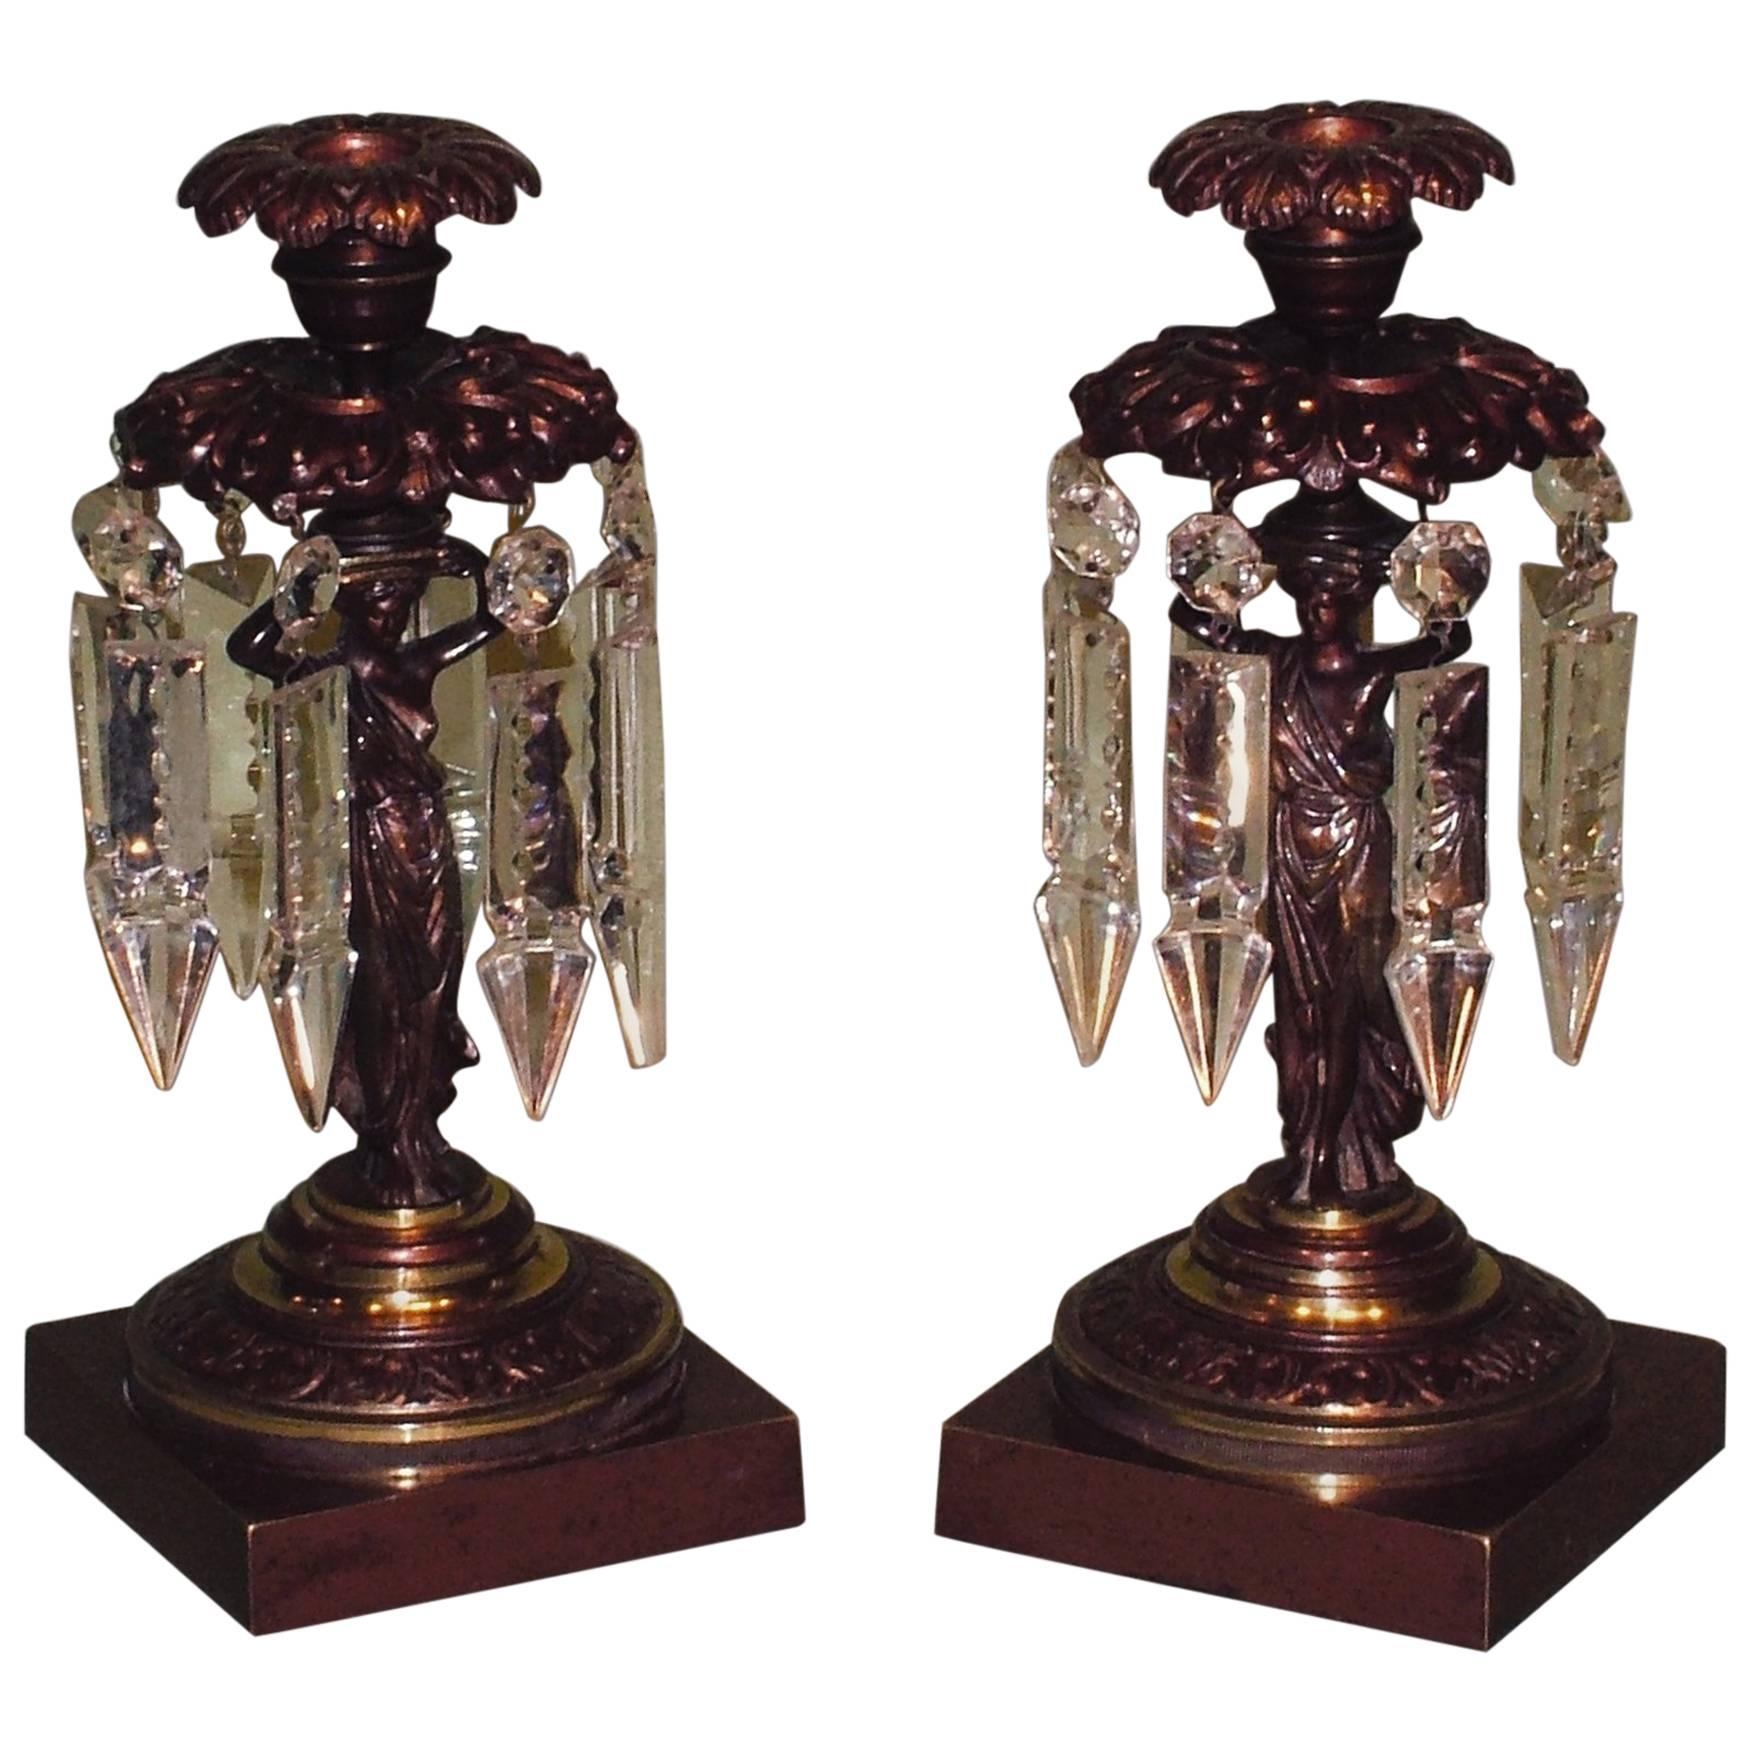 Regency bronze and ormolu classical lady lustre candlesticks For Sale